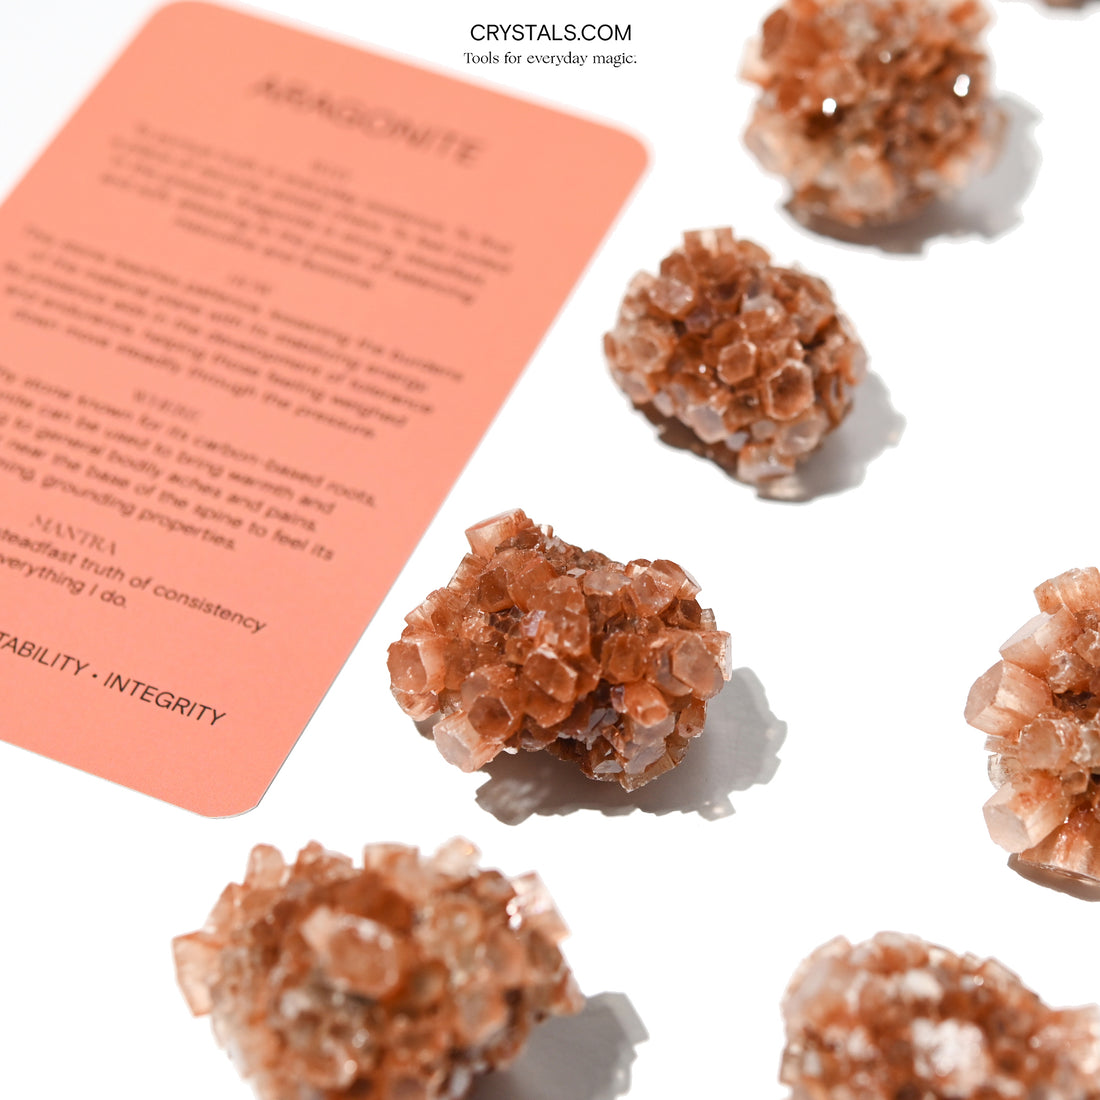 Aragonite Crystal: Discovering the Meaning, Uses, and Power of this Star-Shaped Mineral